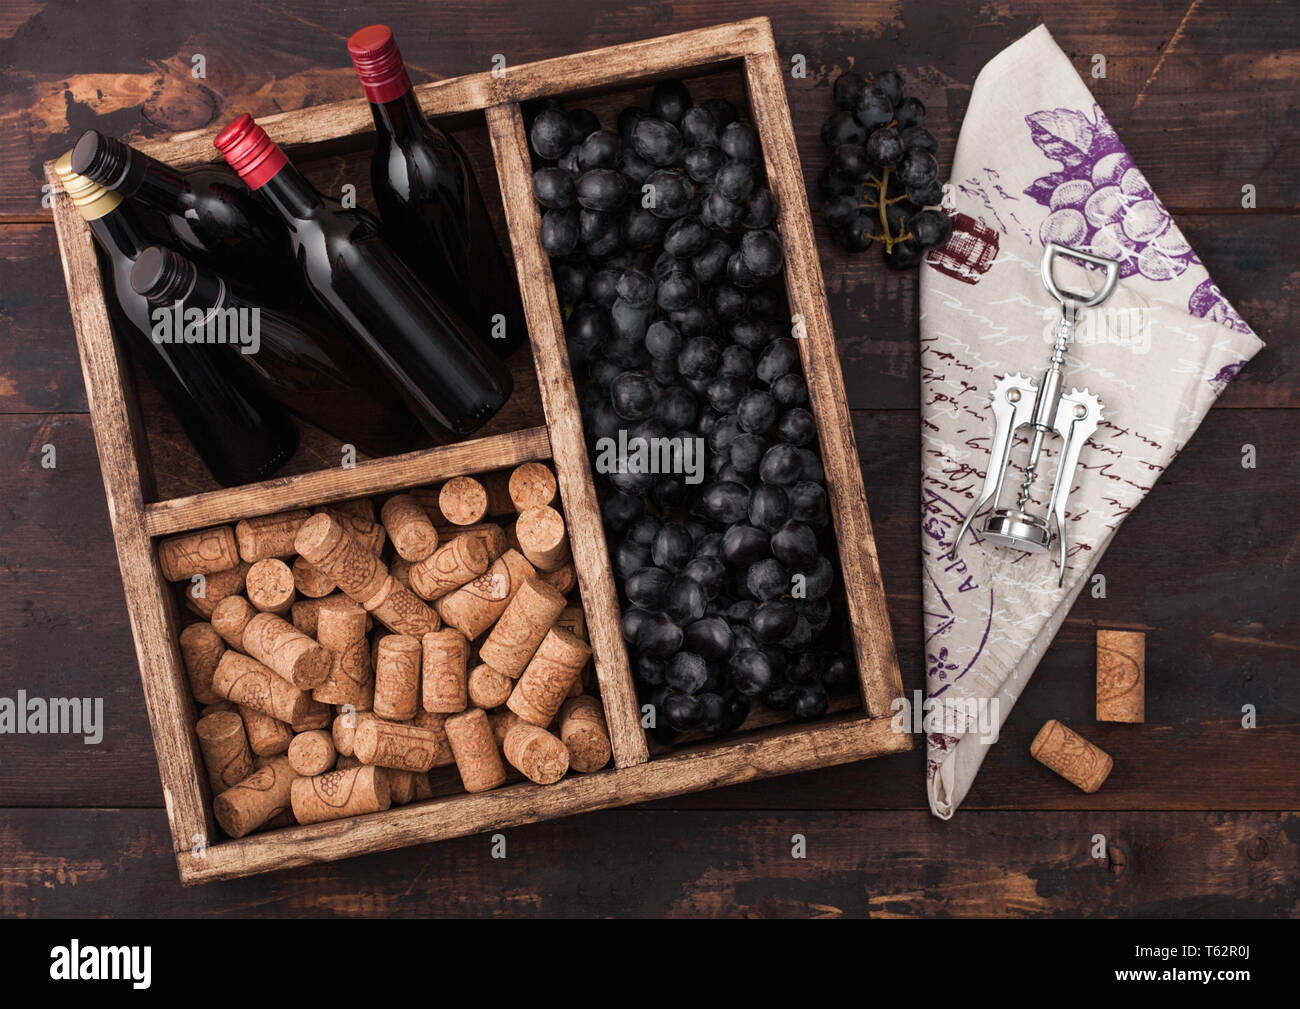 Mini bottles of red wine with dark grapes with corks and corkscrew inside vintage wooden box on dark wooden background with linen towel. Stock Photo